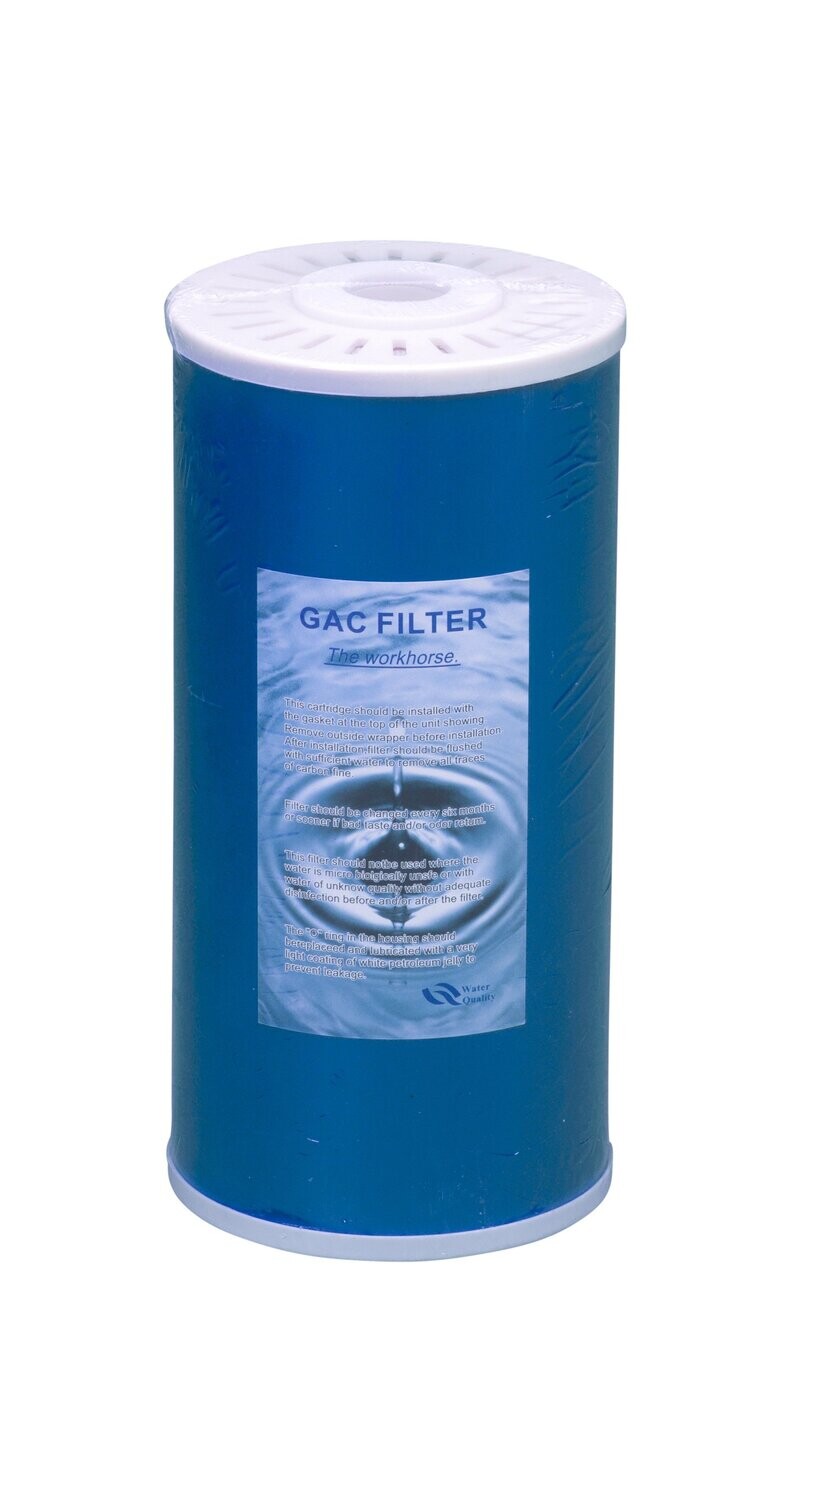 25 cm GAC filter (carbon), 5 micron, filter for chlorine and odor